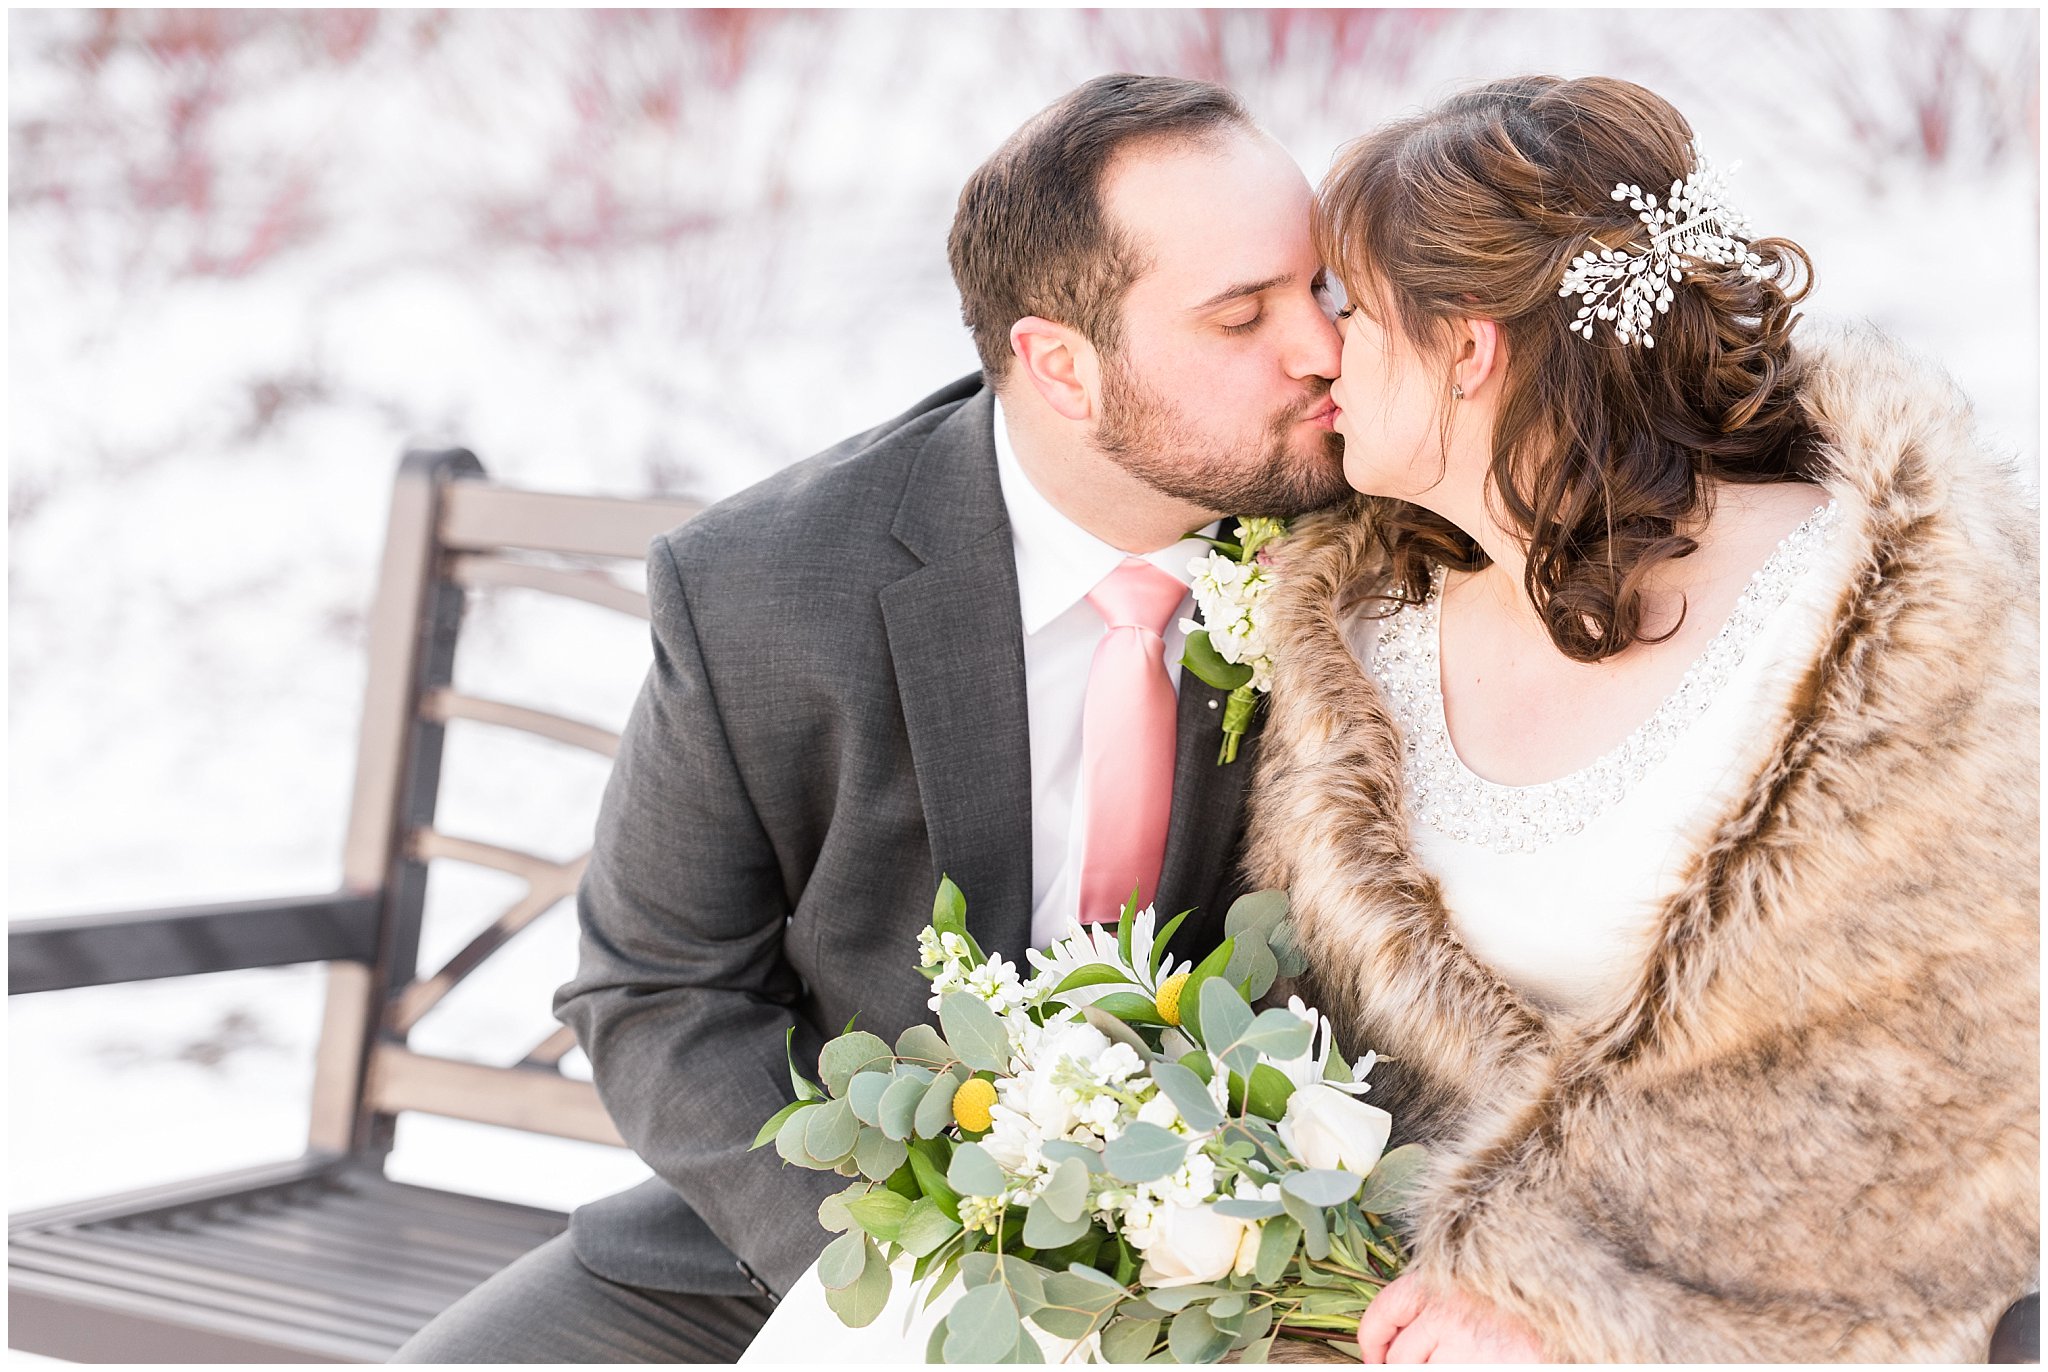 Bride and groom kiss during portraits at the Ogden Temple | Top Utah Wedding and Couples Photos 2019 | Jessie and Dallin Photography